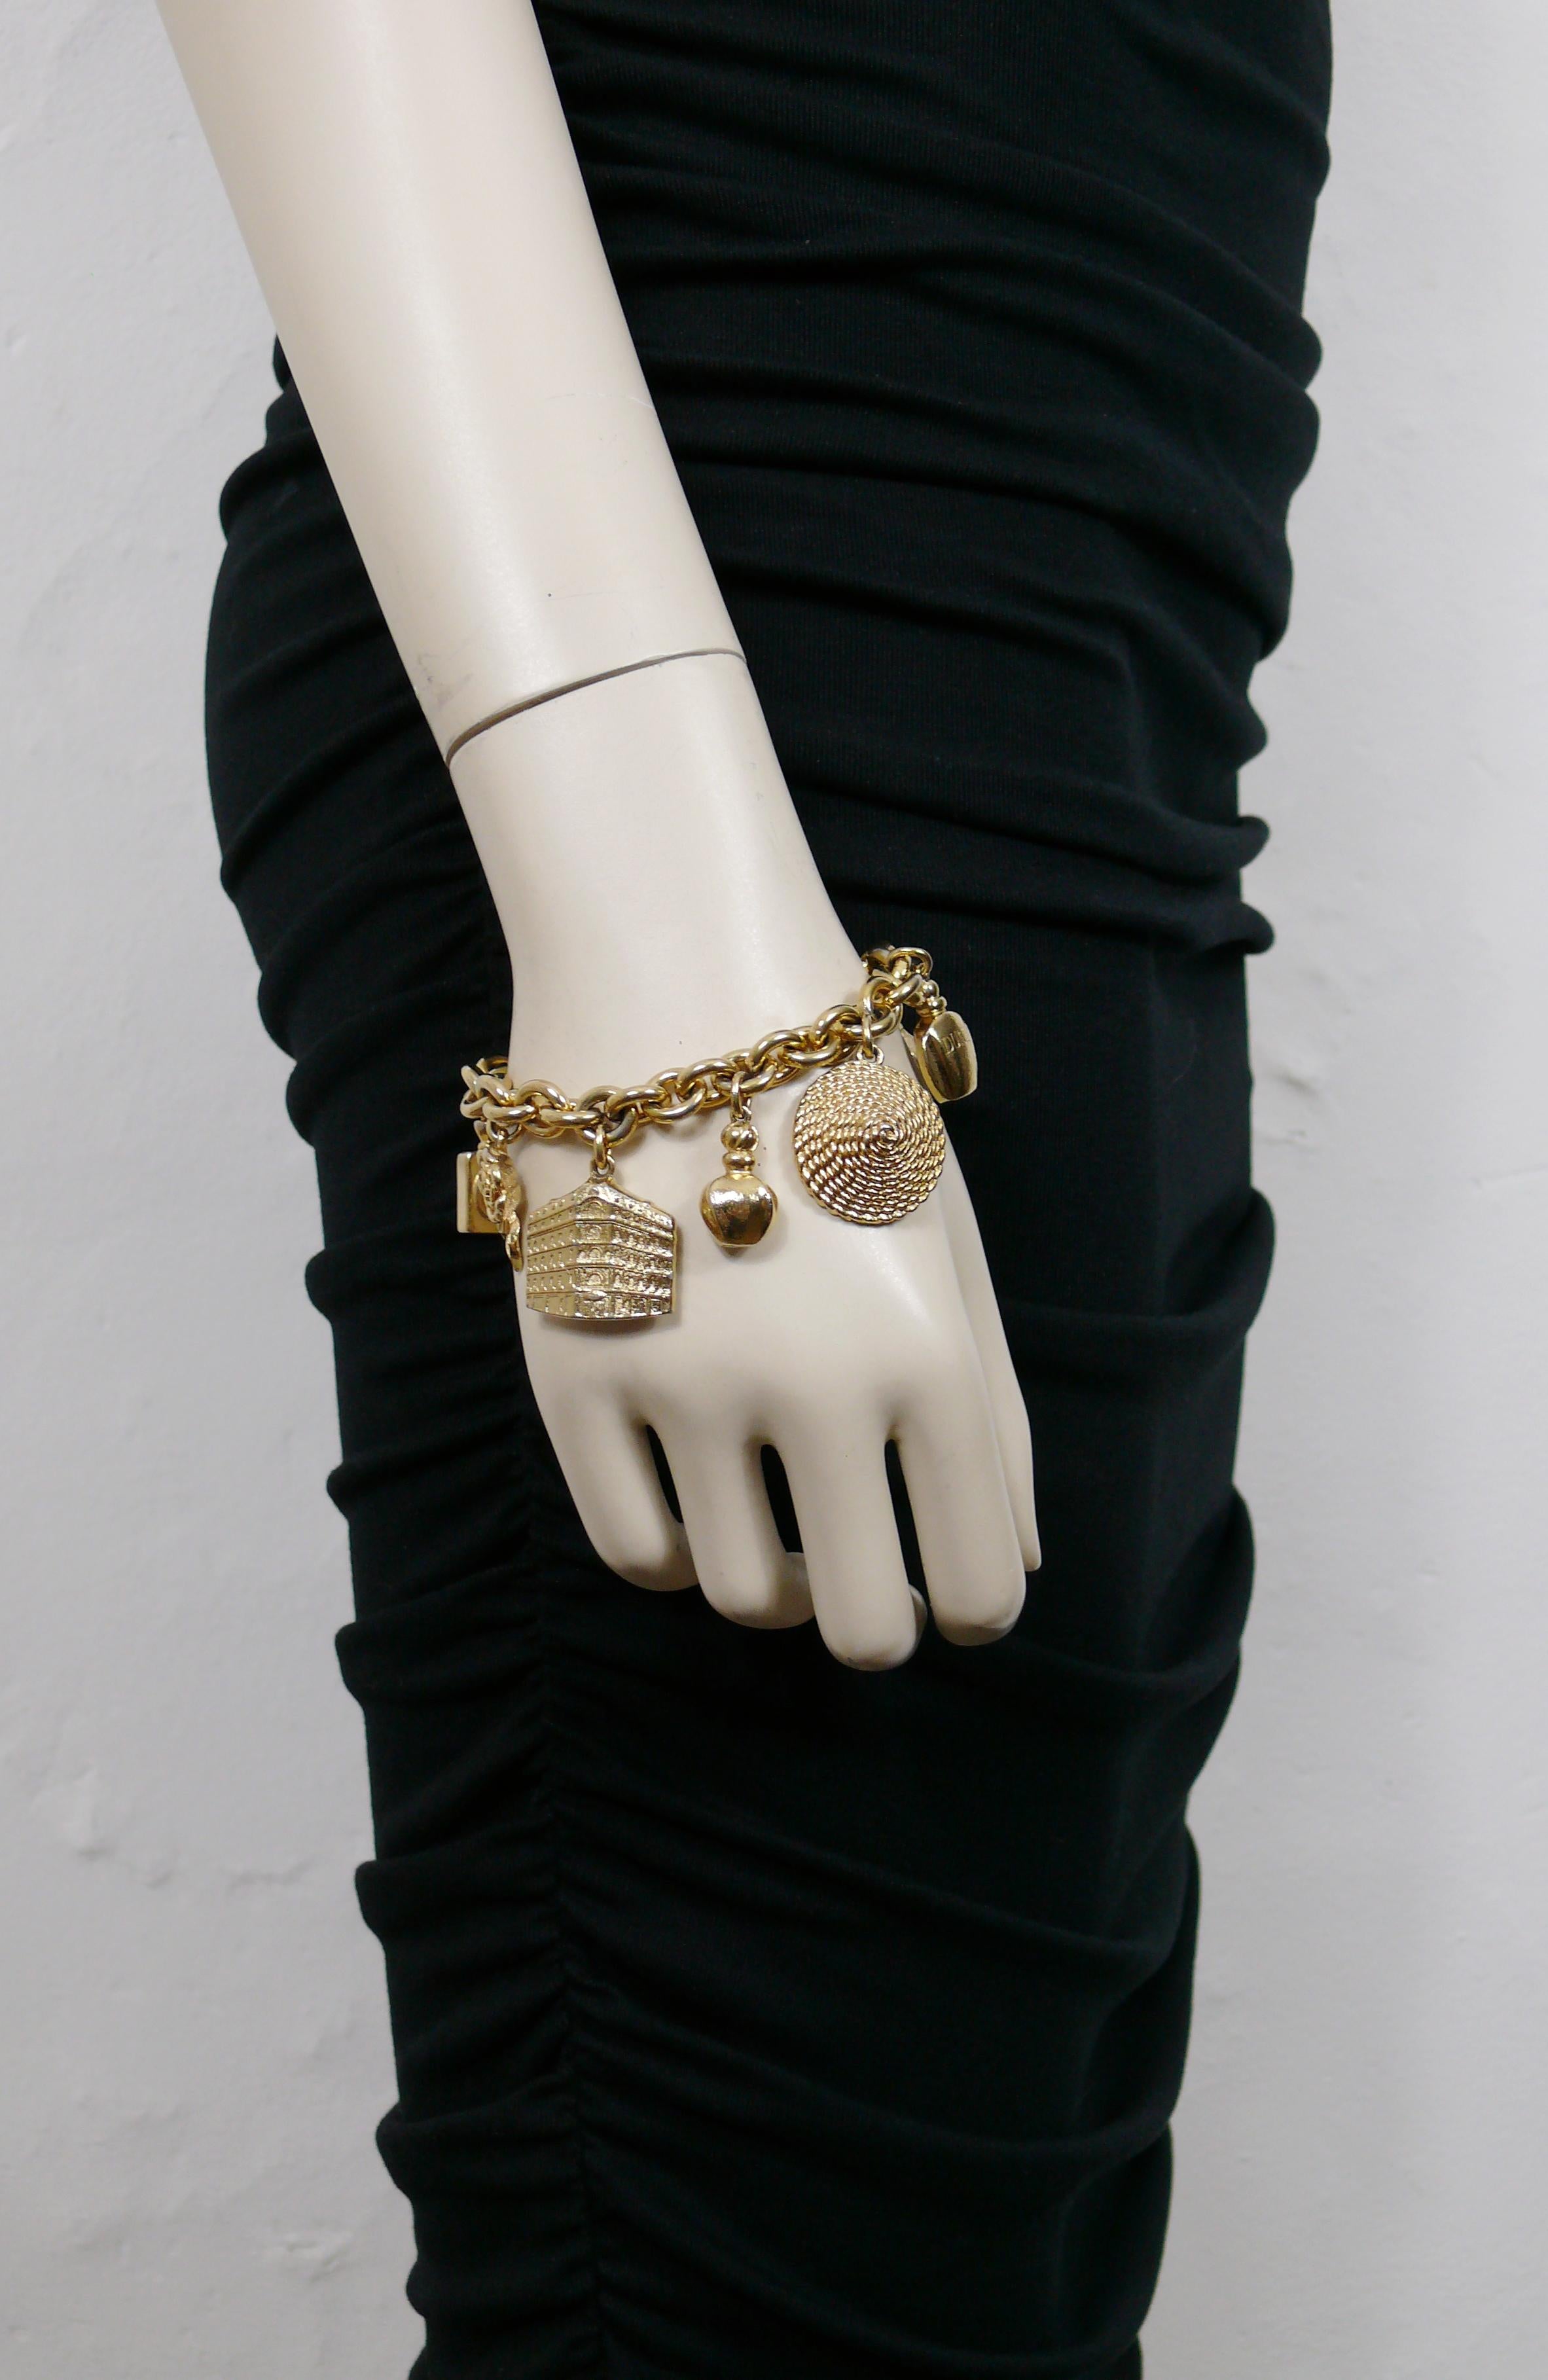 CHRISTIAN DIOR vintage iconic gold toned chain bracelet featuring eight iconic charms : rose, C DIOR logo, 3 perfume bottles, flagship facade, New Look straw hat, gift box with CD monogram.

T-bar and toggle closure.

Embossed CHR. DIOR